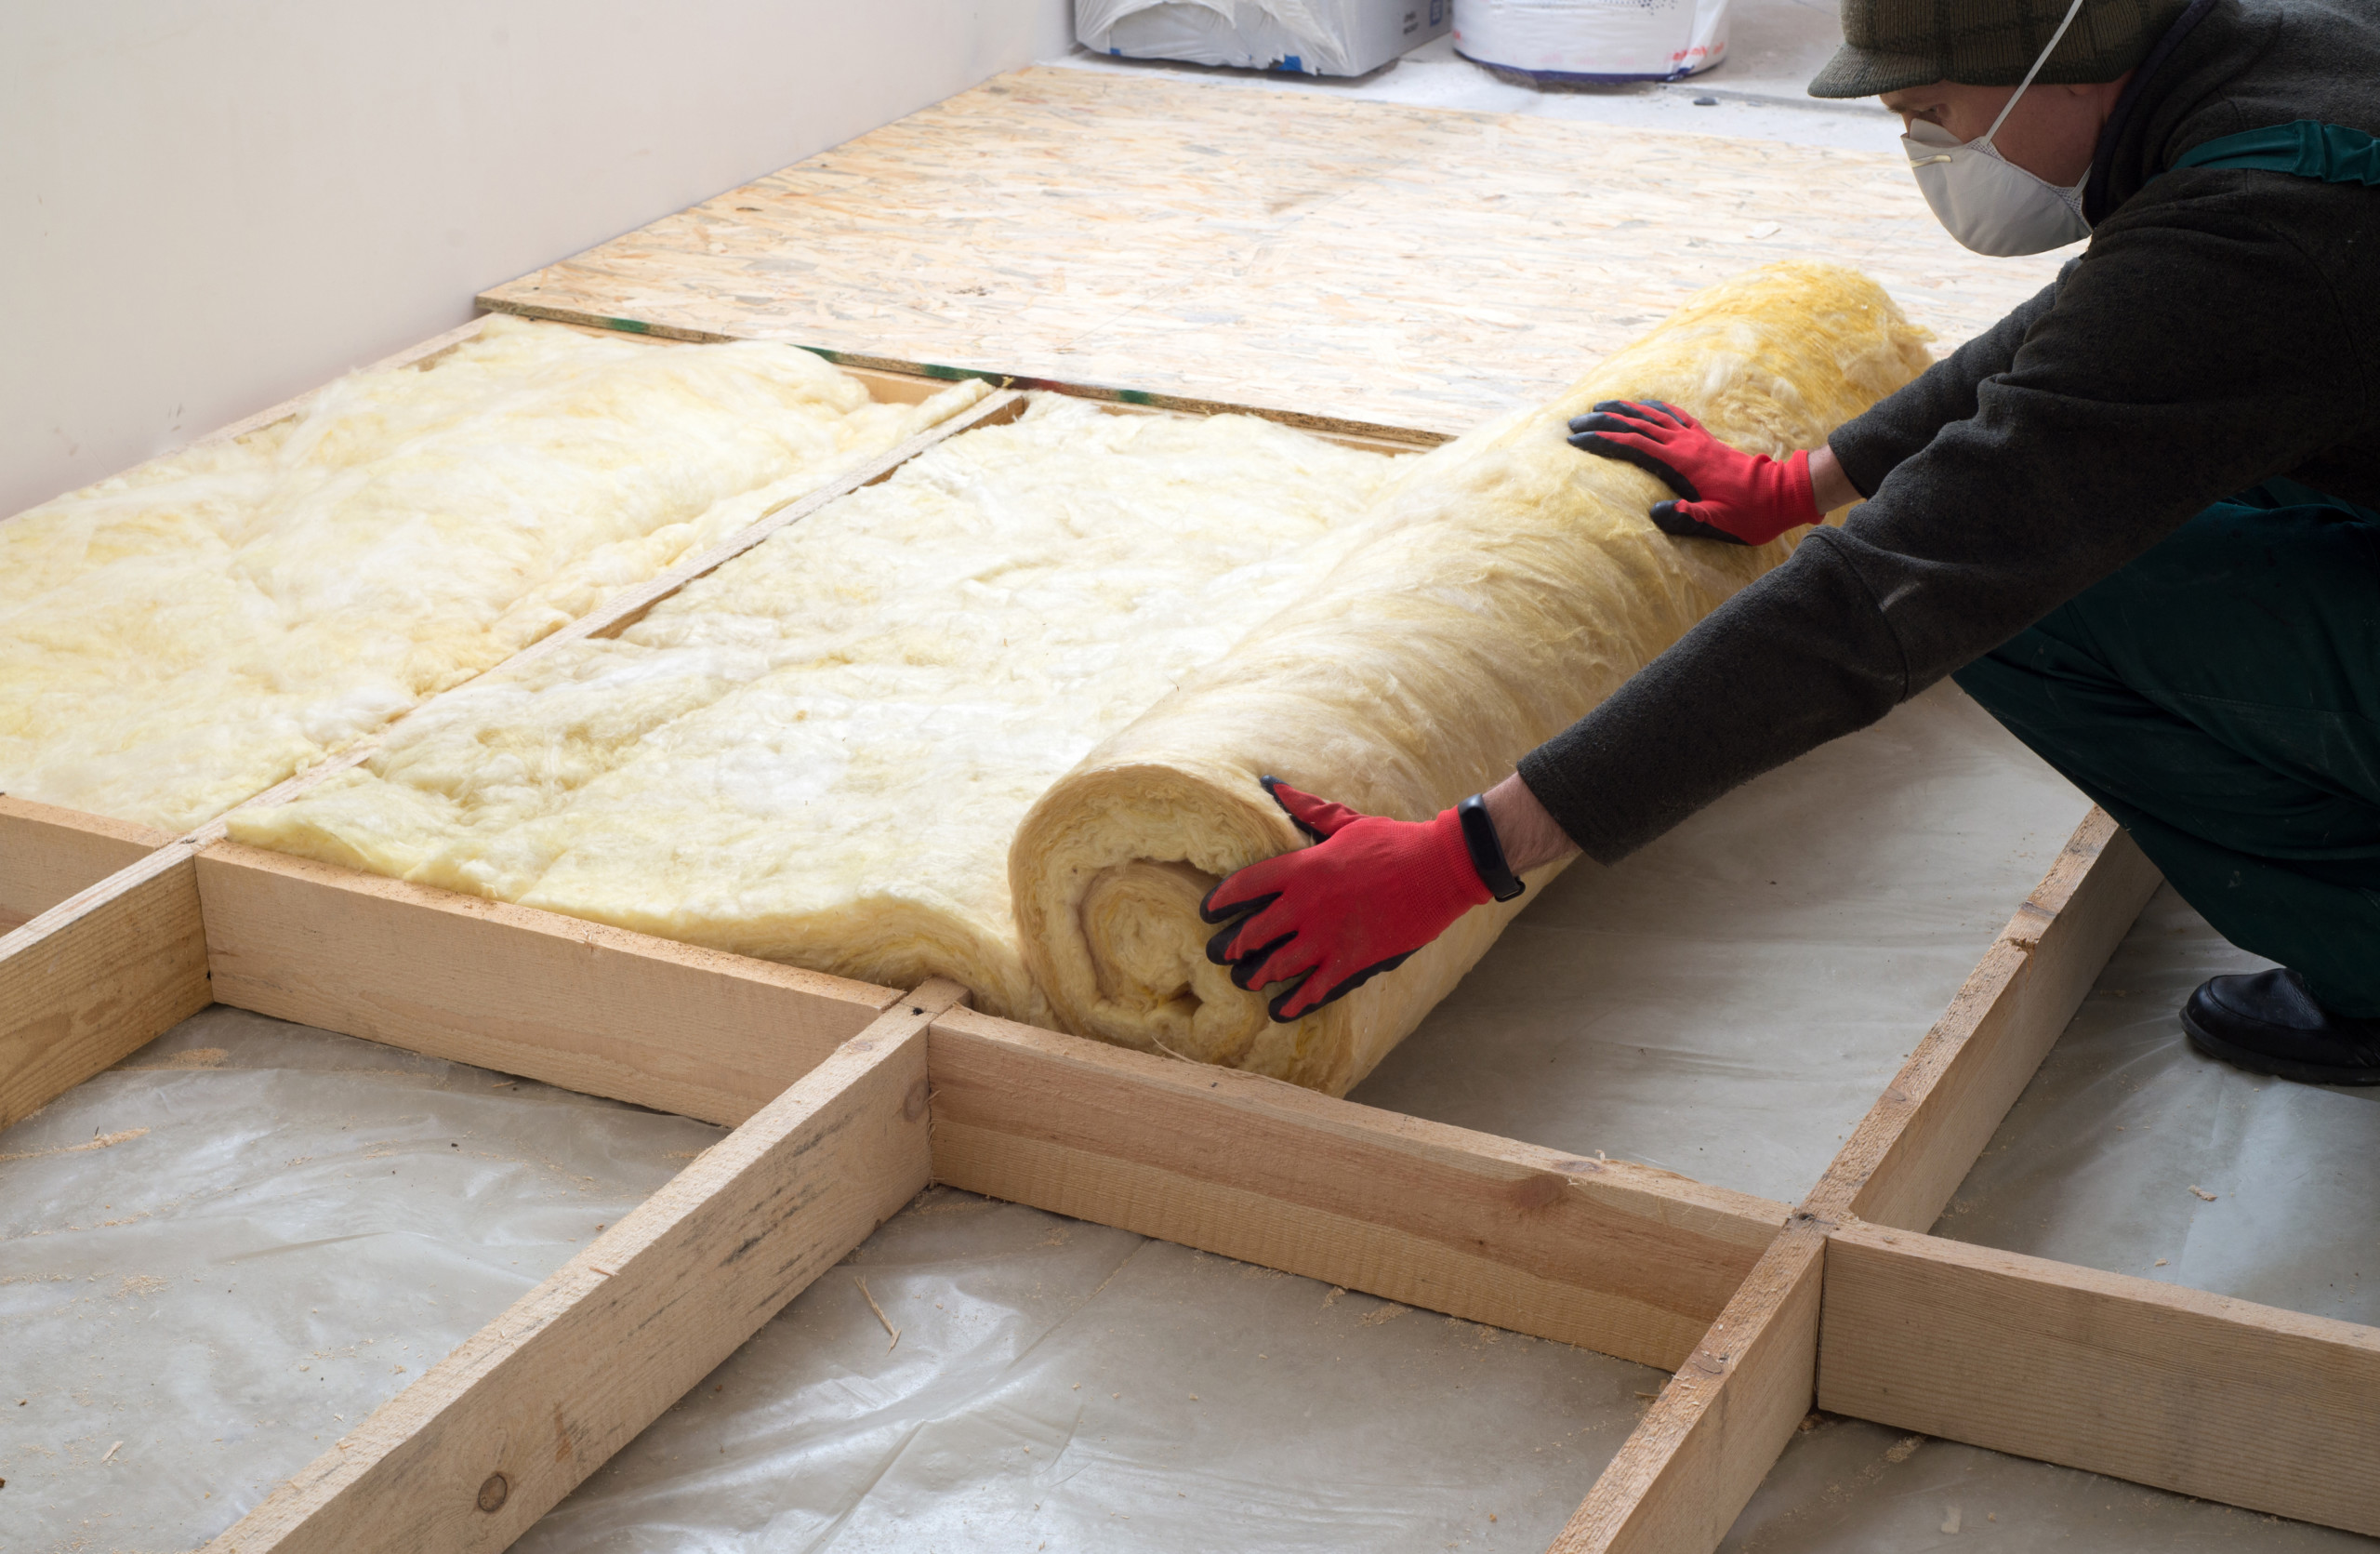 Insulate your home and save energy